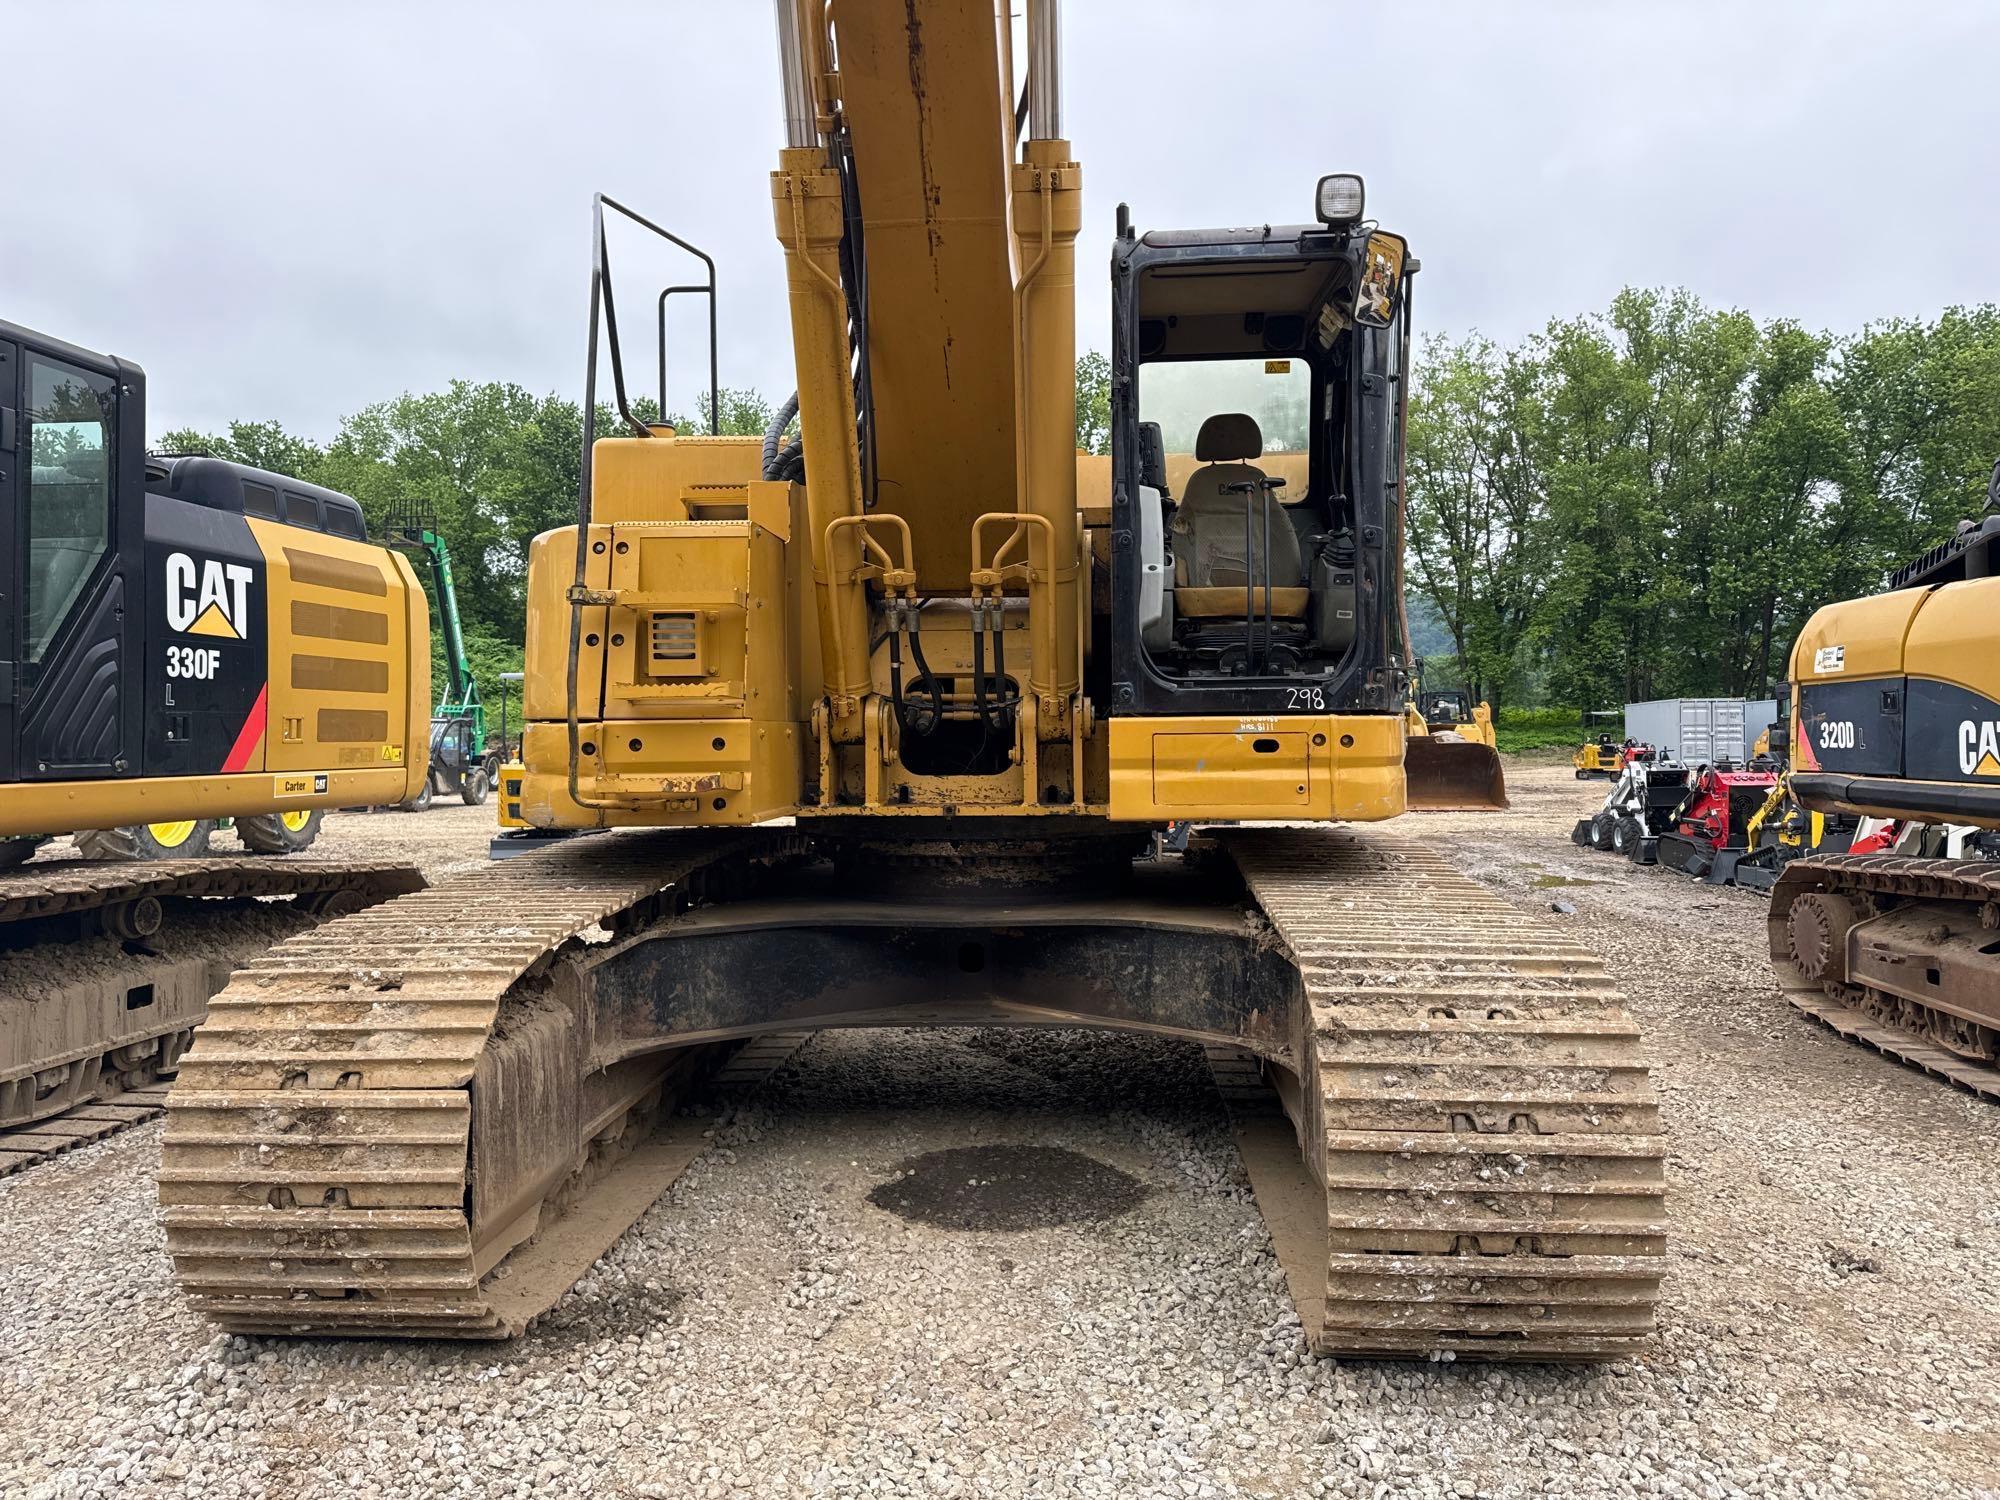 CAT 328D HYDRAULIC EXCAVATOR SN:GTN00188 powered by Cat C7 diesel engine, equipped with Cab, air,